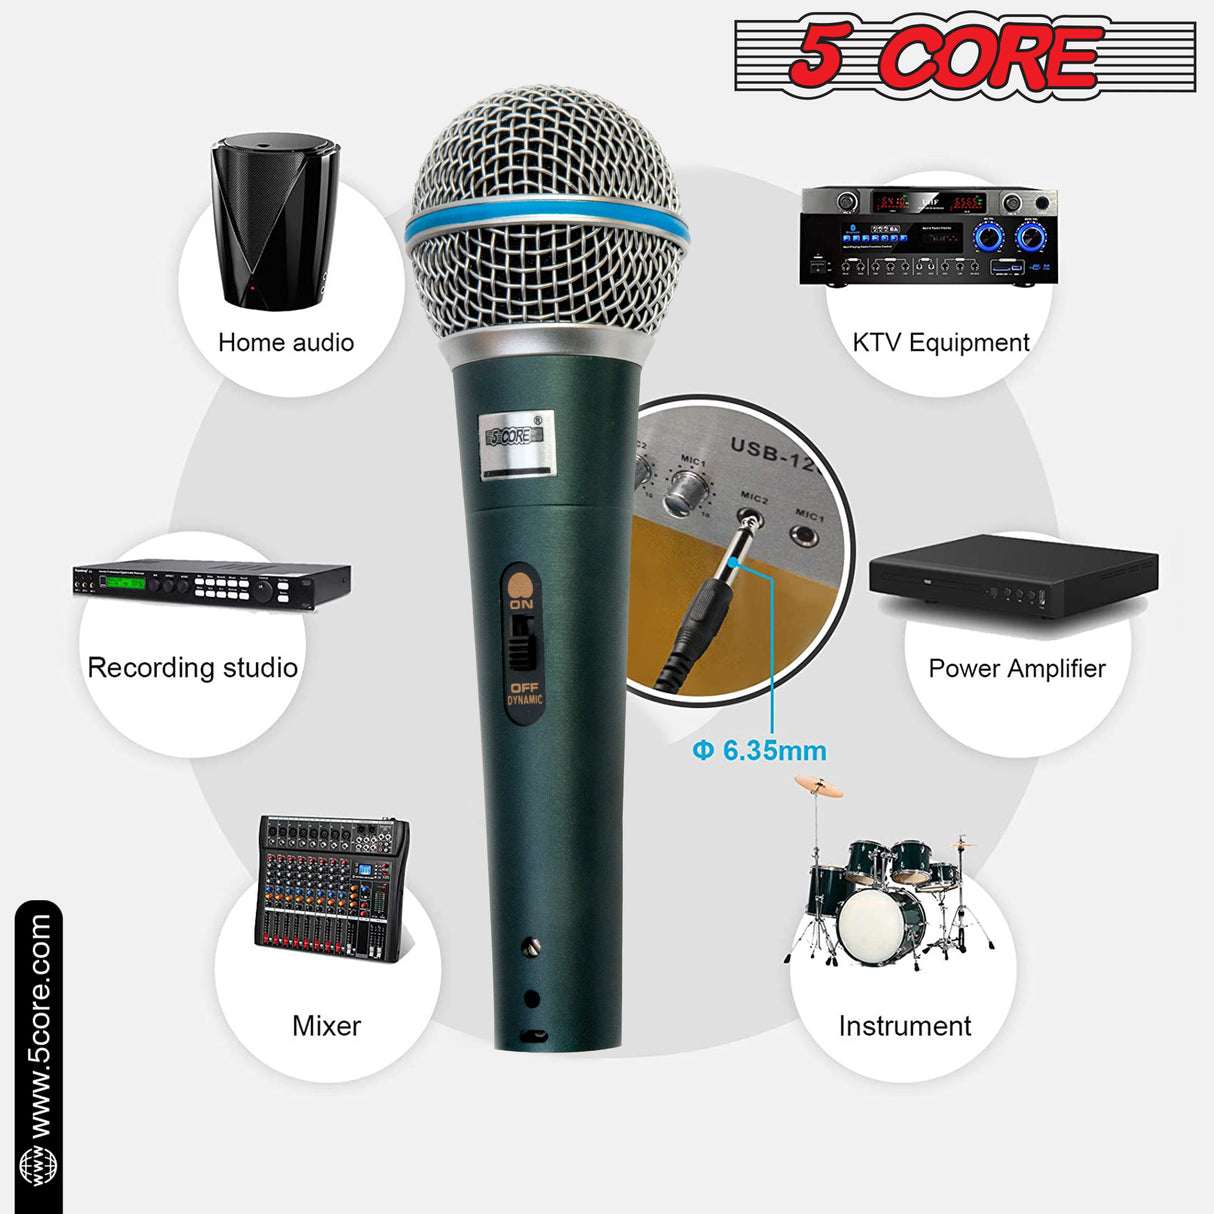 5 Core 2Pcs Premium Vocal Dynamic Cardioid Handheld Microphone Unidirectional Mic with 12ft Detachable XLR Cable to ¼ inch Audio Jack; Mic Clip; and On/Off Switch for Karaoke Singing BETA 2PCS